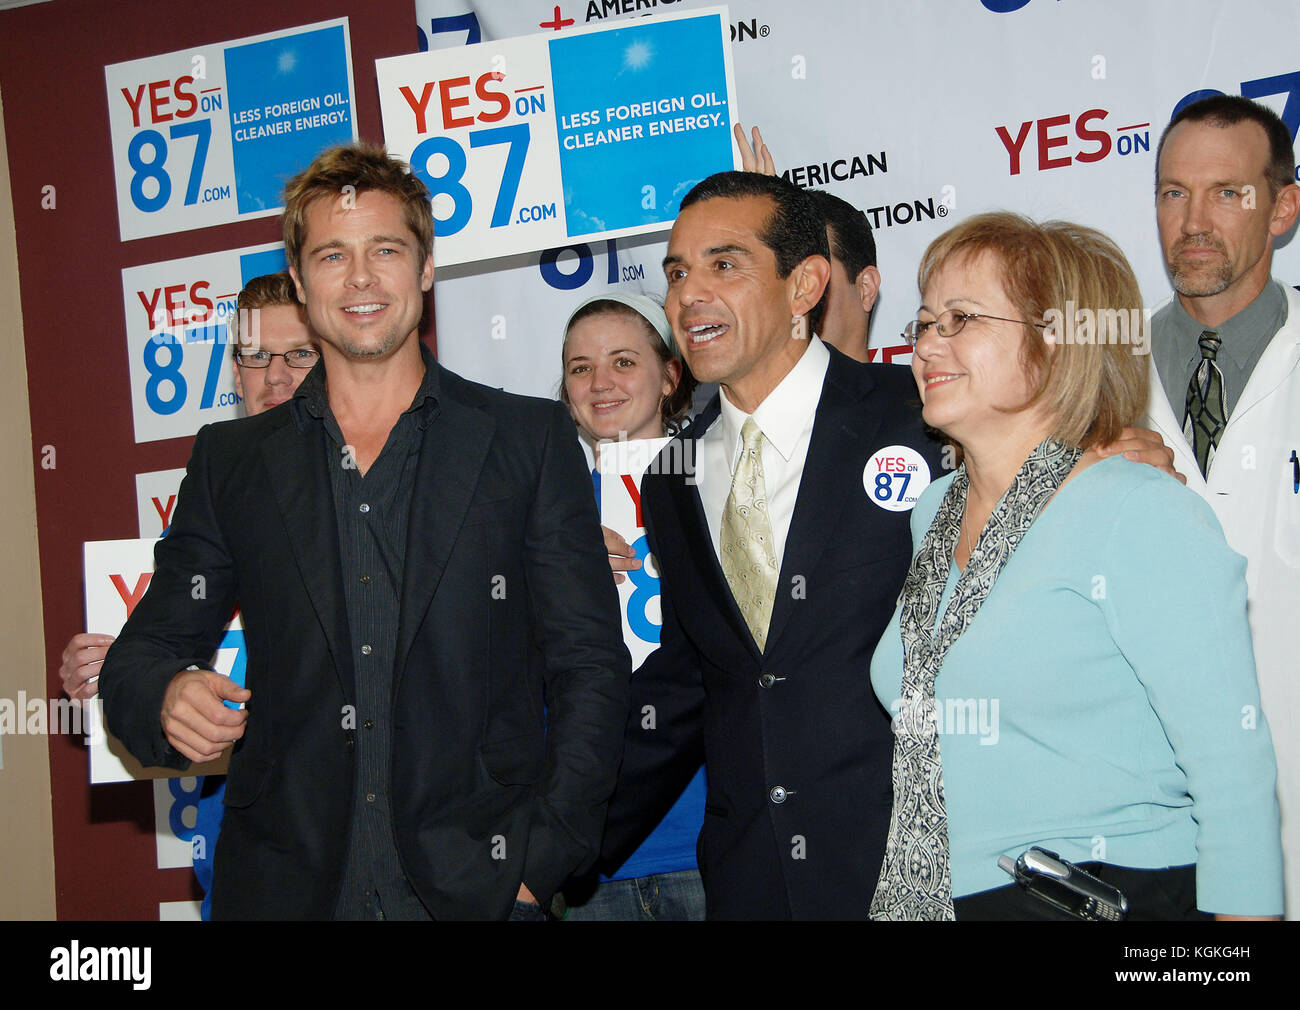 Brad Pitt and Los Angeles mayor Antonio Villaraigosa  at the L.A. Labor Headquarters for a get out and vote YES on 87.  headshot full length smile Brad Pitt 014  = Brad Pitt attending, People, Vertical, USA, Los Angeles, Actor, Film Premiere,  Photography, Red Carpet Event, Brad Pitt - Actor, Arts Culture and Entertainment, , Celebrities, Stock Photo